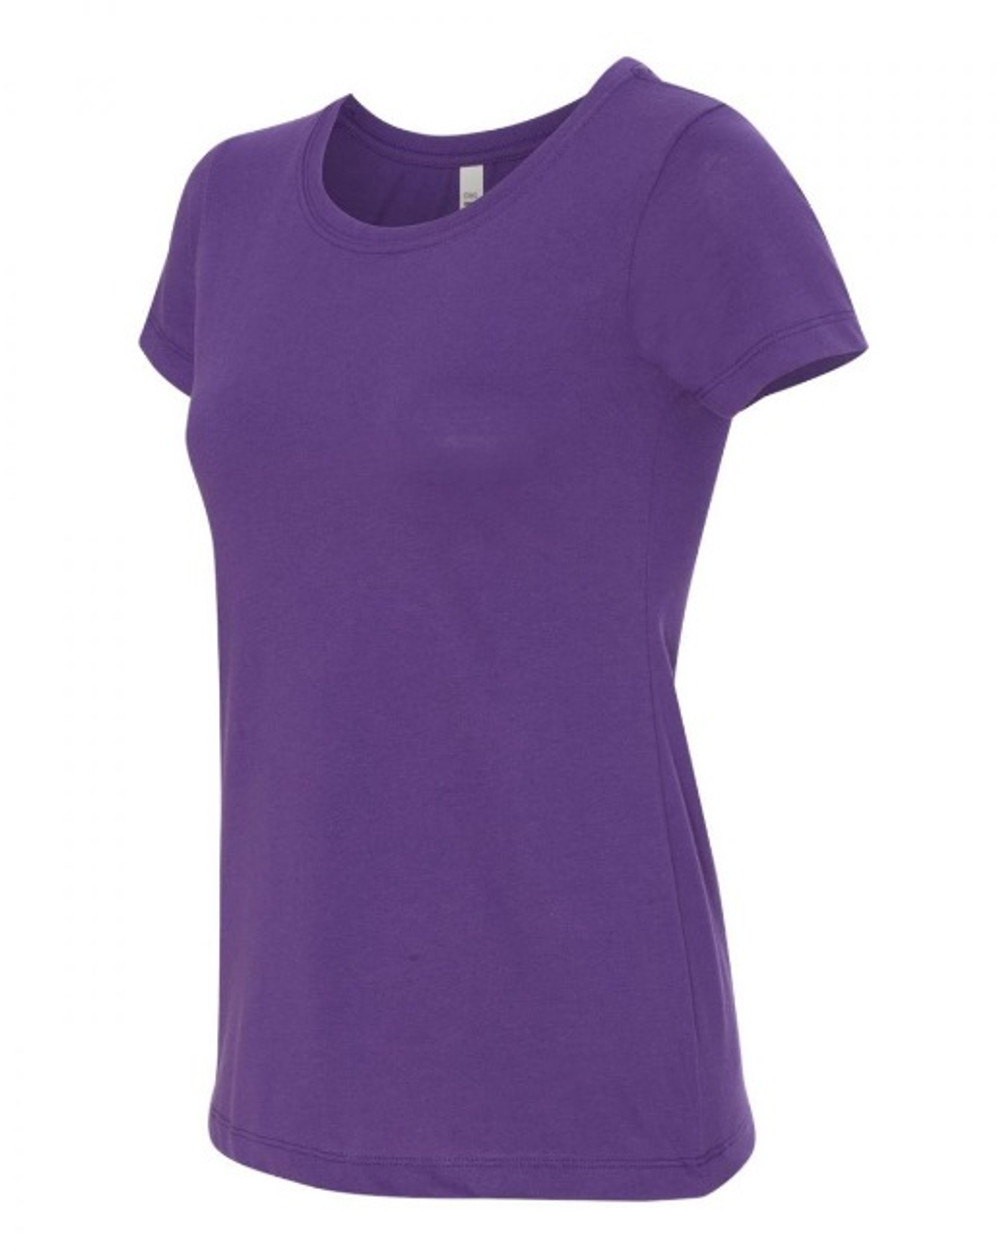 Ladies Fitted Cotton T Shirts from size 8 to size 20 t shirts are comb